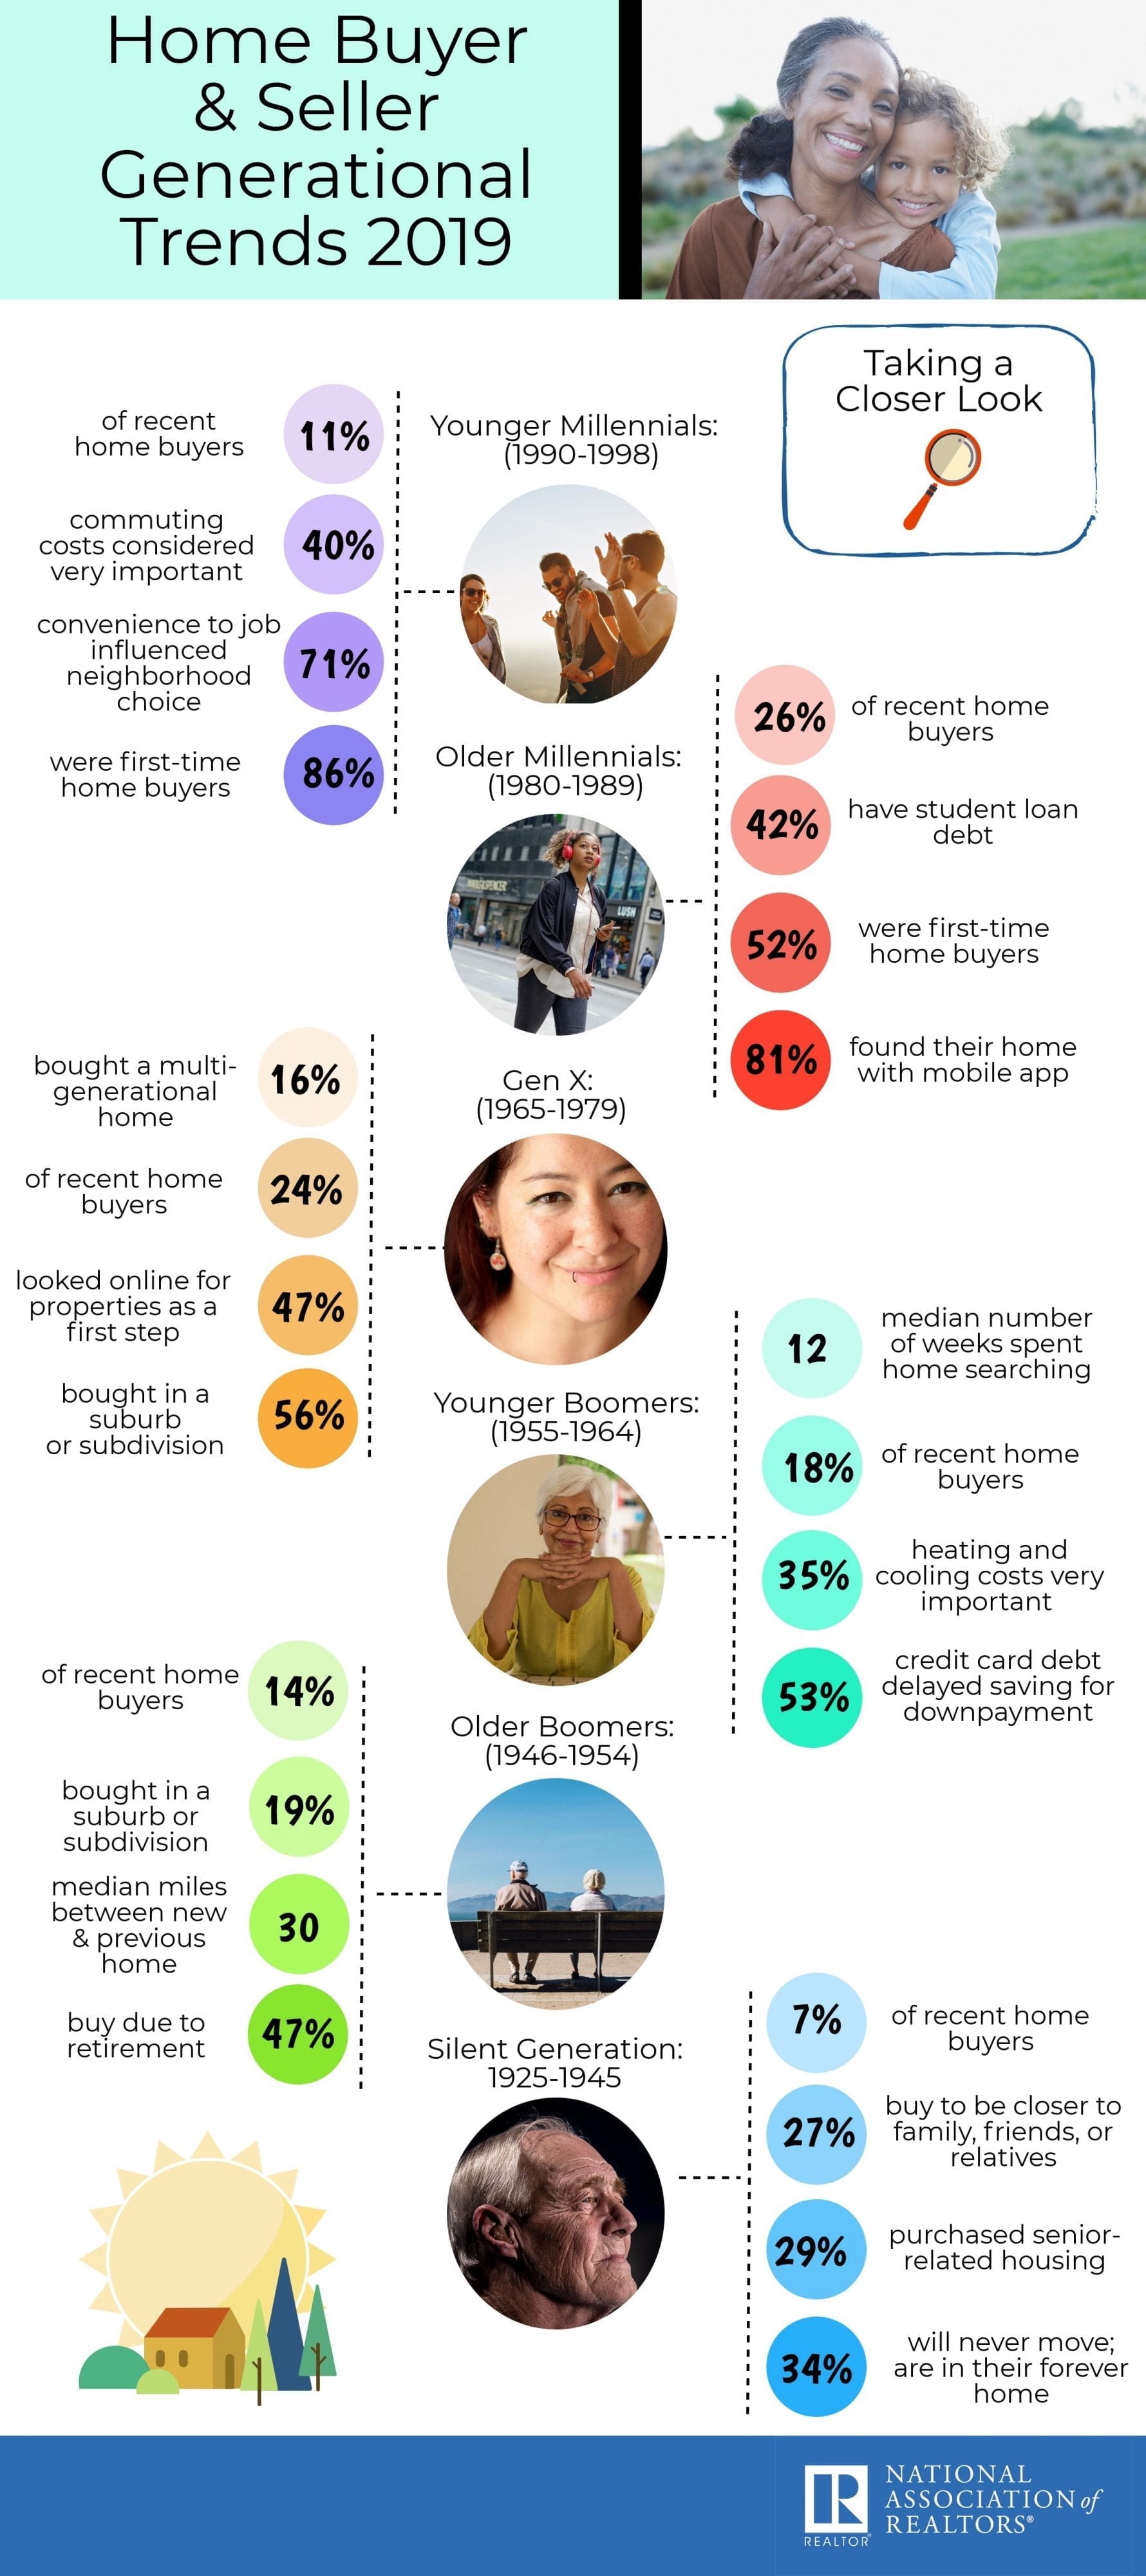 home-buyer-and-seller-generational-trends-2019-infographic